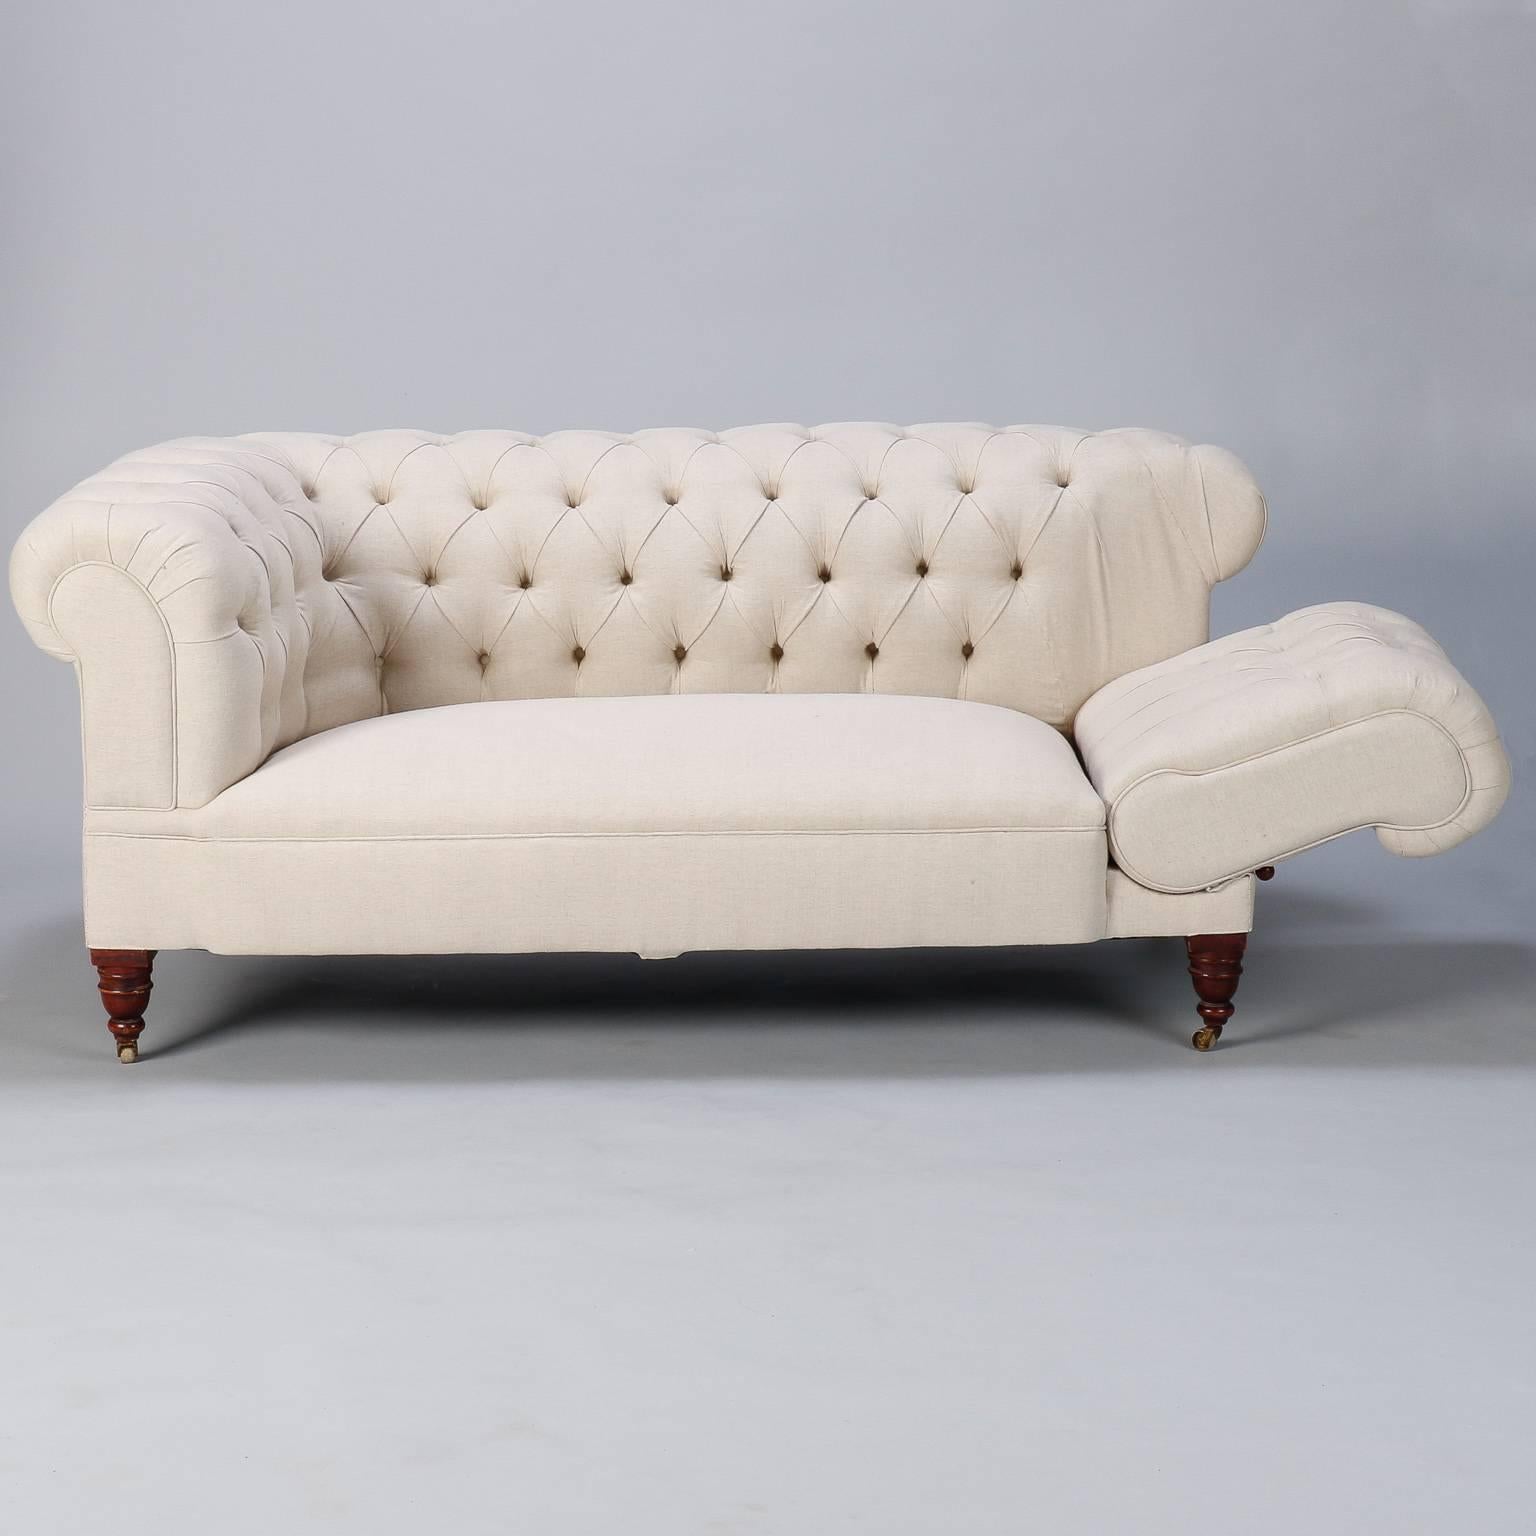 20th Century Linen Chesterfield Sofa with Collapsible Arm